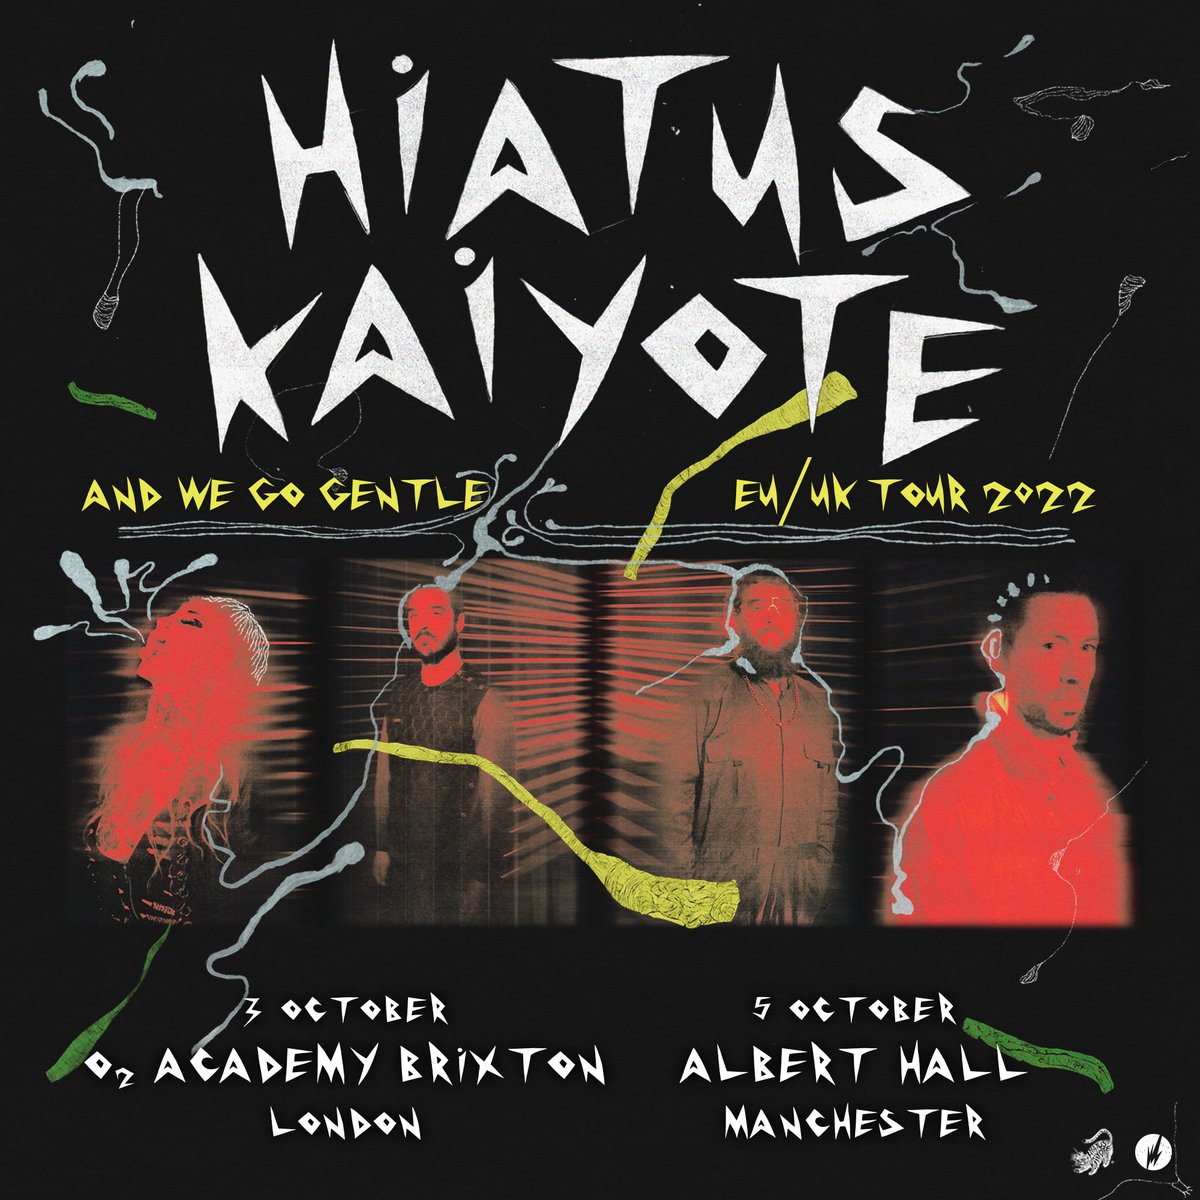 TWO WEEKS TO GO: Having recently finished their US tour (which included a show with @flyinglotus), @HiatusKaiyote are heading to the EU / UK at the end of the month... They're taking to our stage on the 5th of Oct for one of just two UK dates! Tickets: tinyurl.com/2jczu5yz